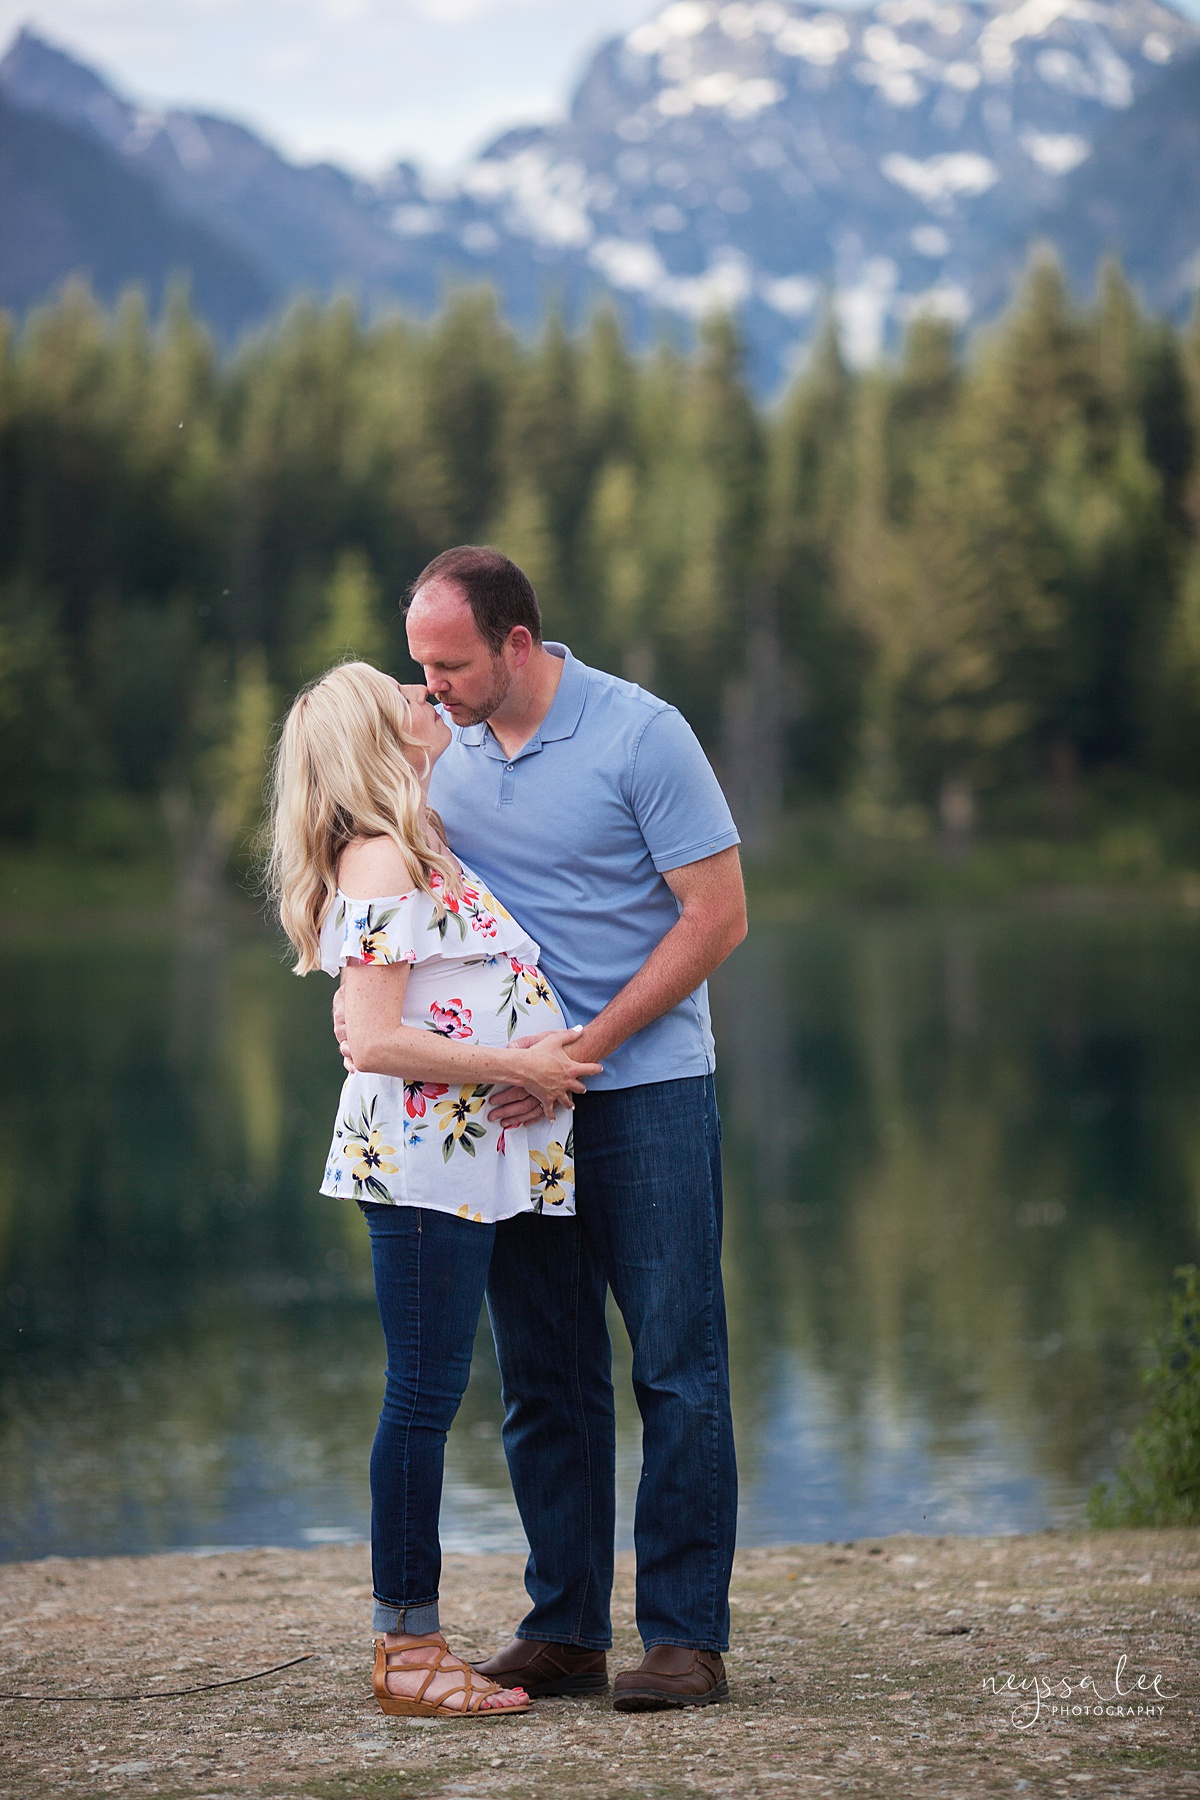 Maternity Photos in the Mountains, Gold Creek Pond, Neyssa Lee Photography, Snoqualmie Family Photographer, Mountain View